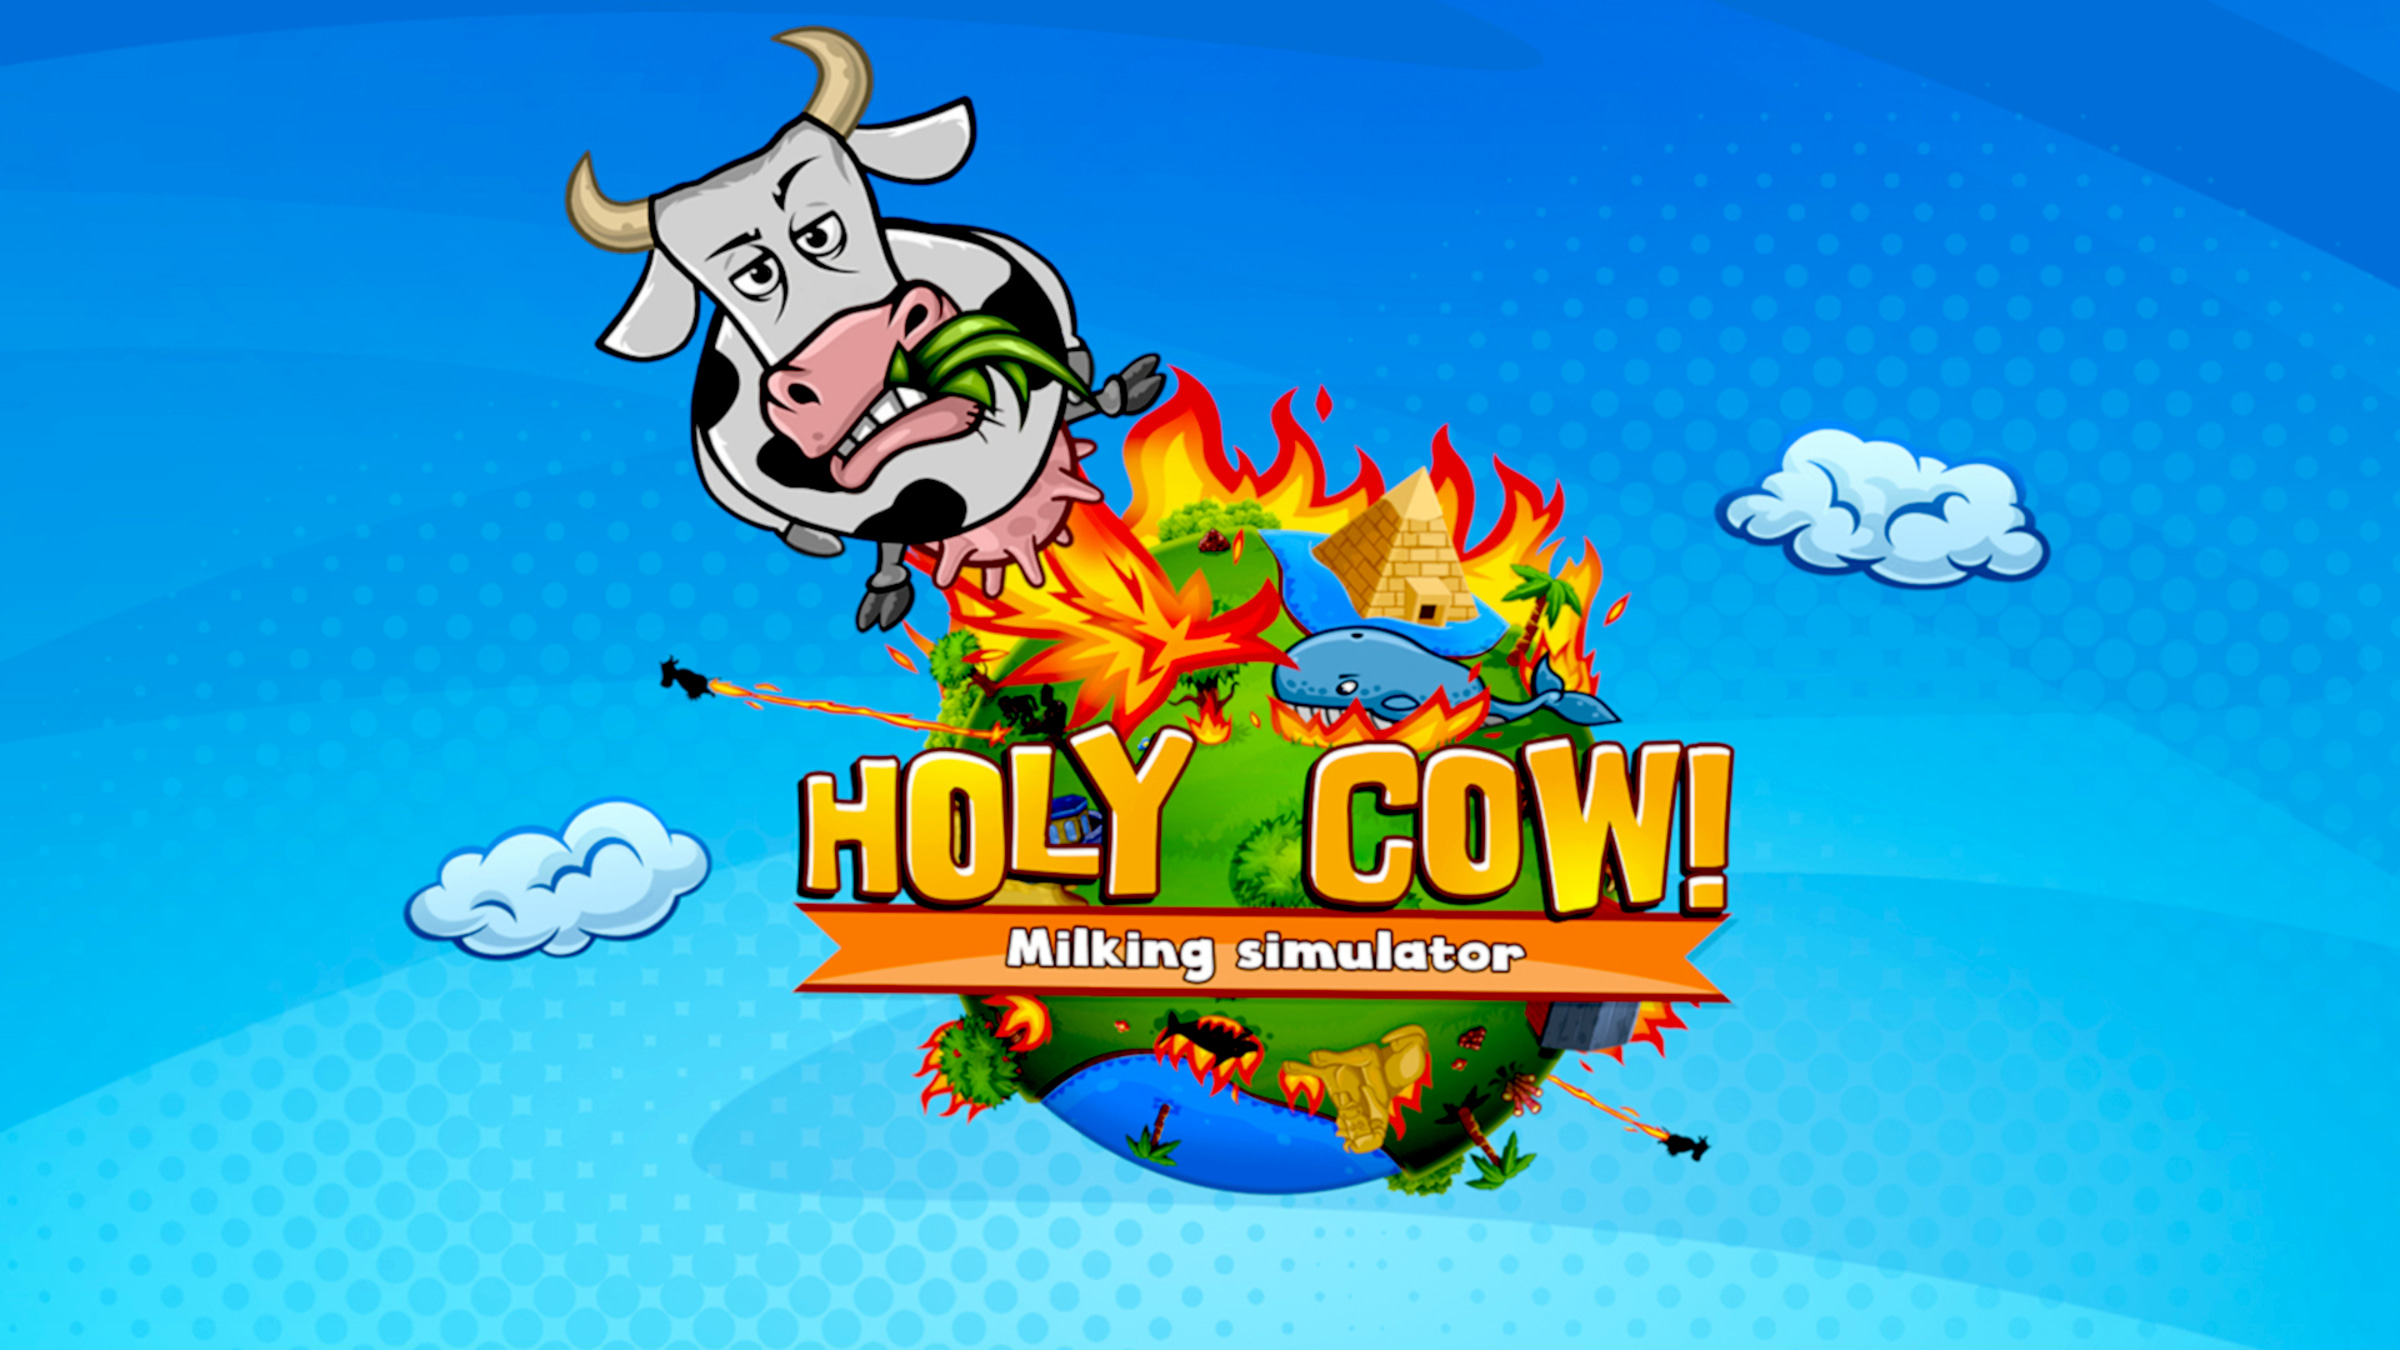 HOLY COW! Milking Simulator for Nintendo Switch - Nintendo Official Site